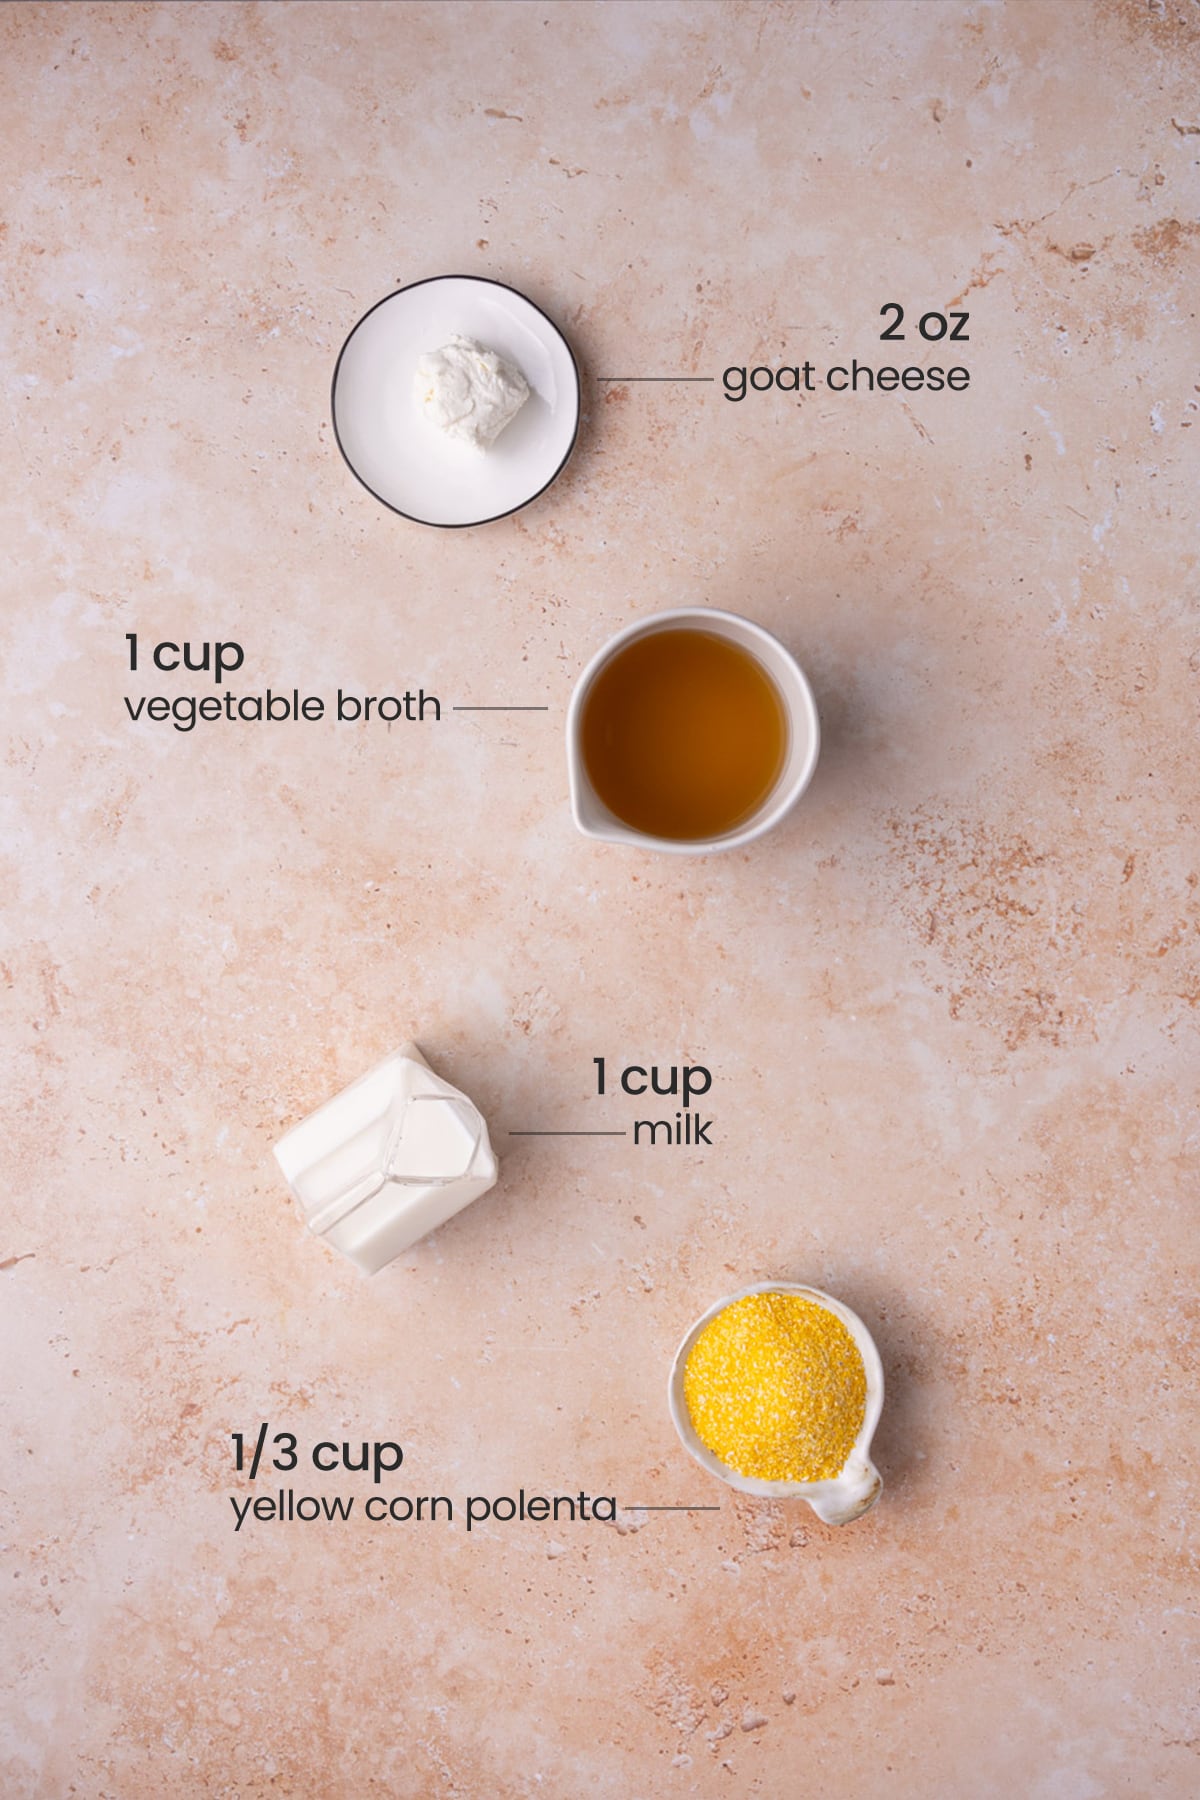 Overhead image of ingredients for polenta with goat cheese - goat cheese, vegetable broth, milk, and yellow corn polenta.